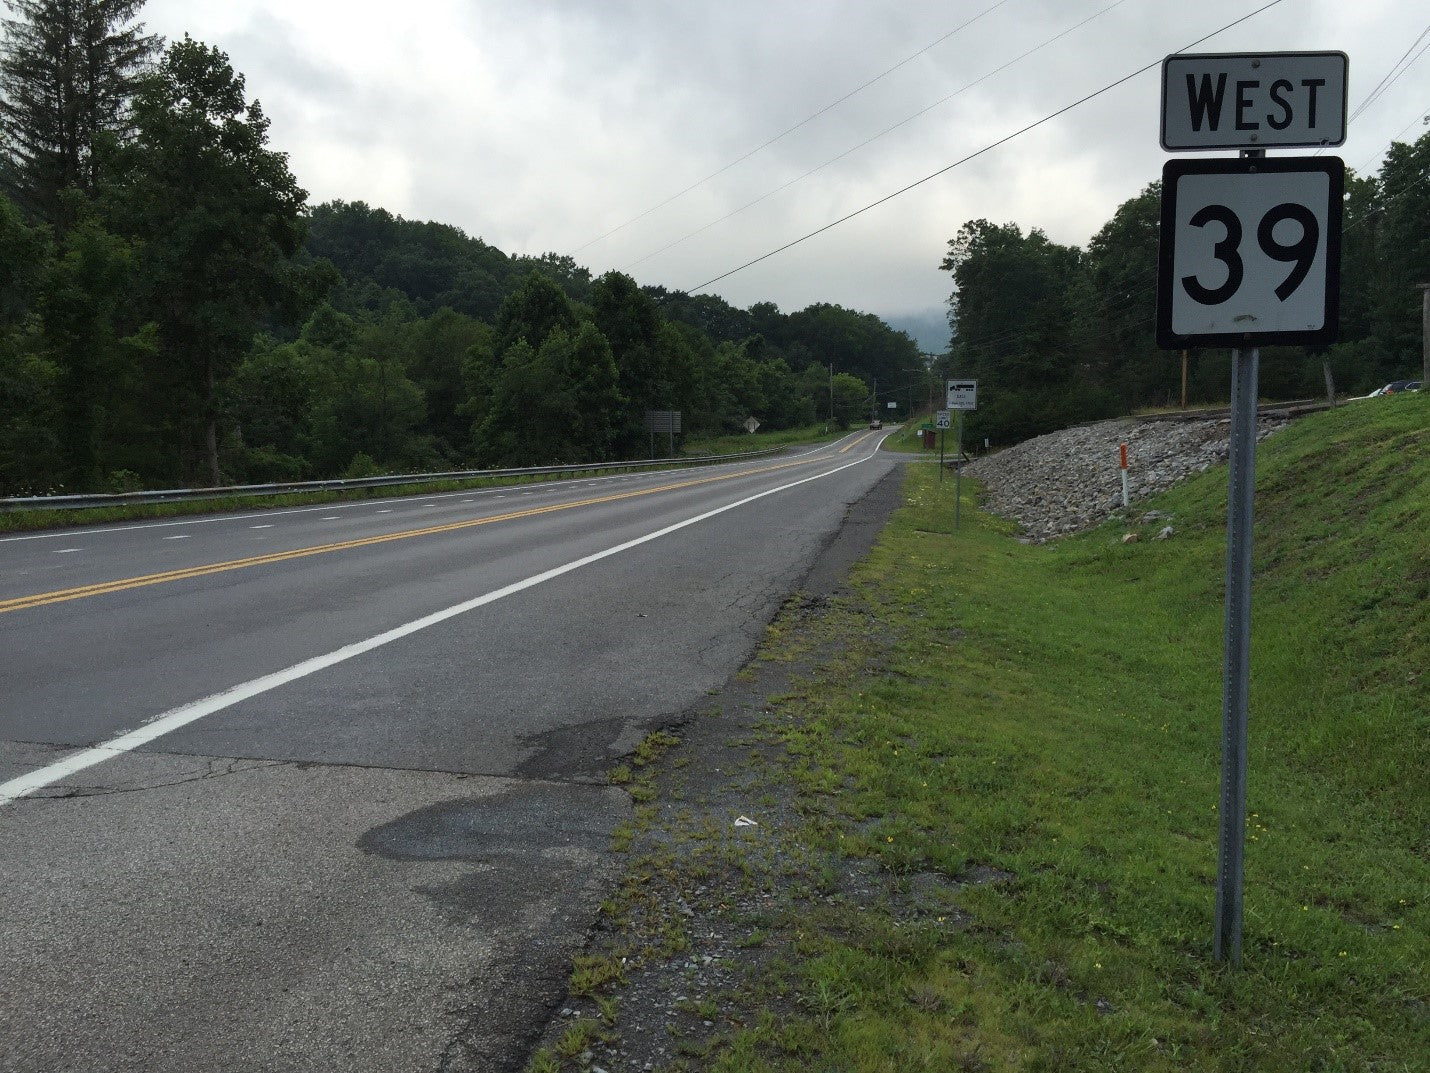 West Virginia 39 - motorcycle roads and destination